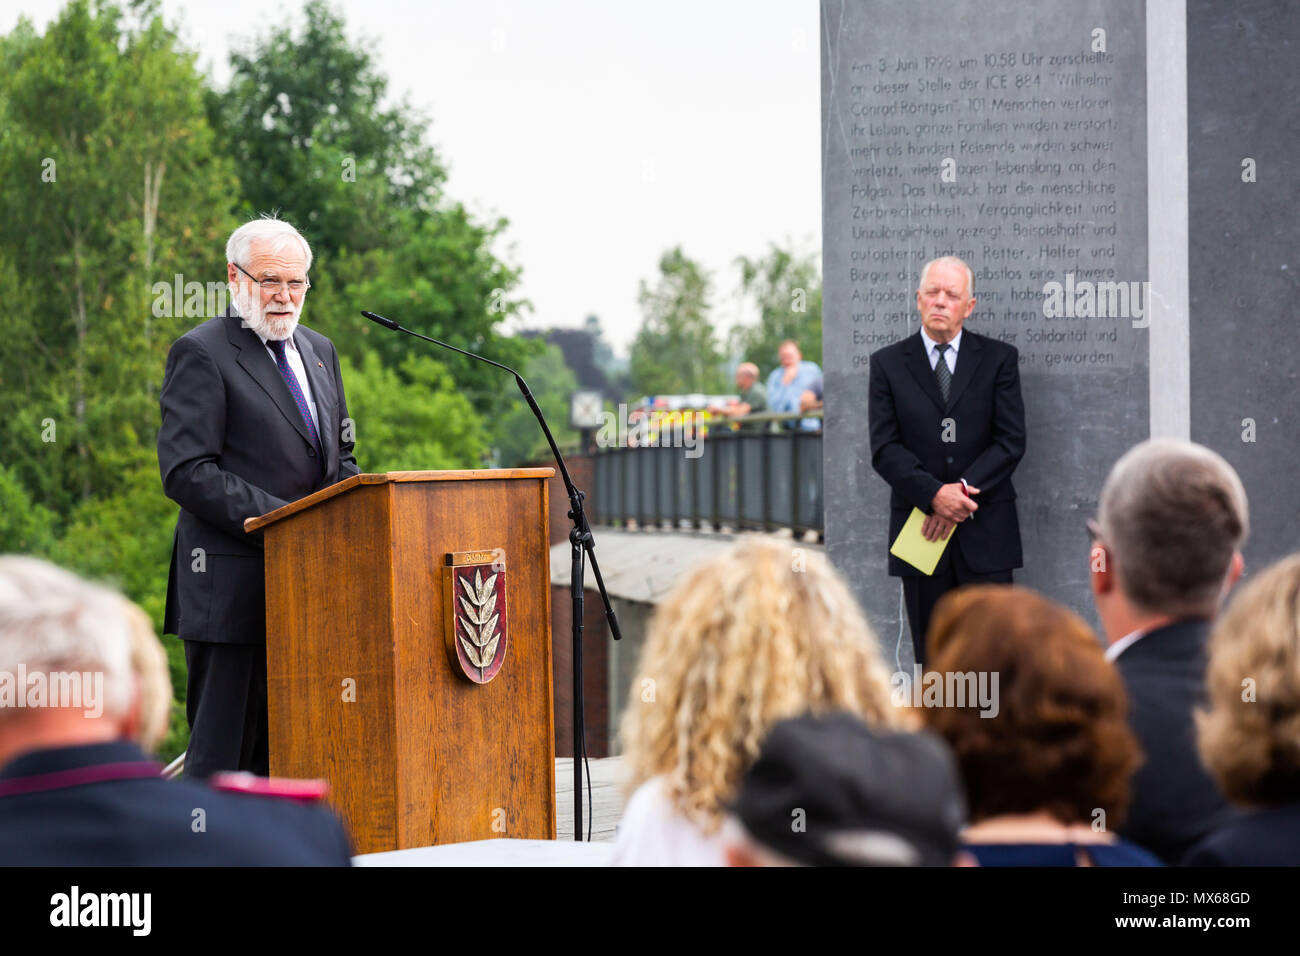 Eschede, Germany. 03 May 2018, Germany, Eschede: The spokesman from 'Selbsthilfe Eschede' (lit. self-help Eschede', Heinrich Loewen, speaking during the 20th anniversary of the train accident in Eschede. The ICE 'Wilhelm Conrad Roentgen' derailed on the 3 June 1998 at tempo 200 and drove into a highway bridge. 101 people died. Photo: Philipp von Ditfurth/dpa Stock Photo